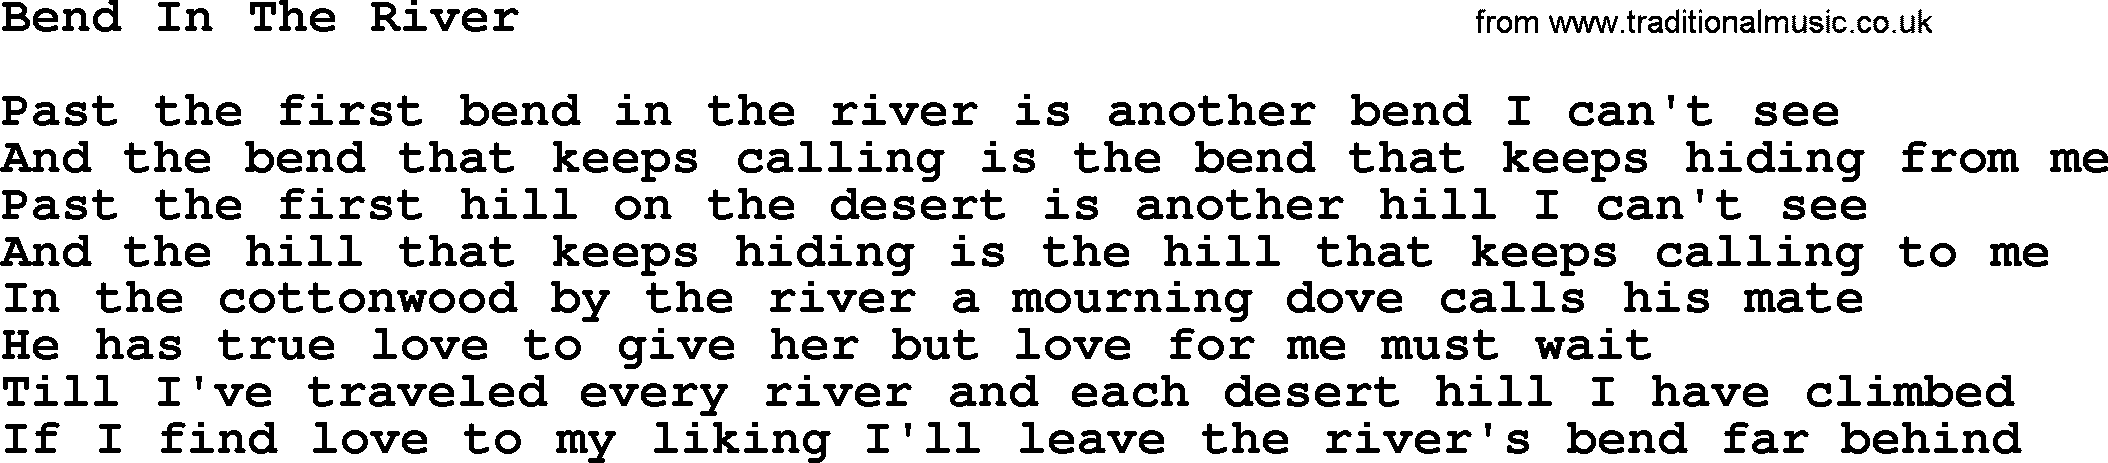 Marty Robbins song: Bend In The River, lyrics